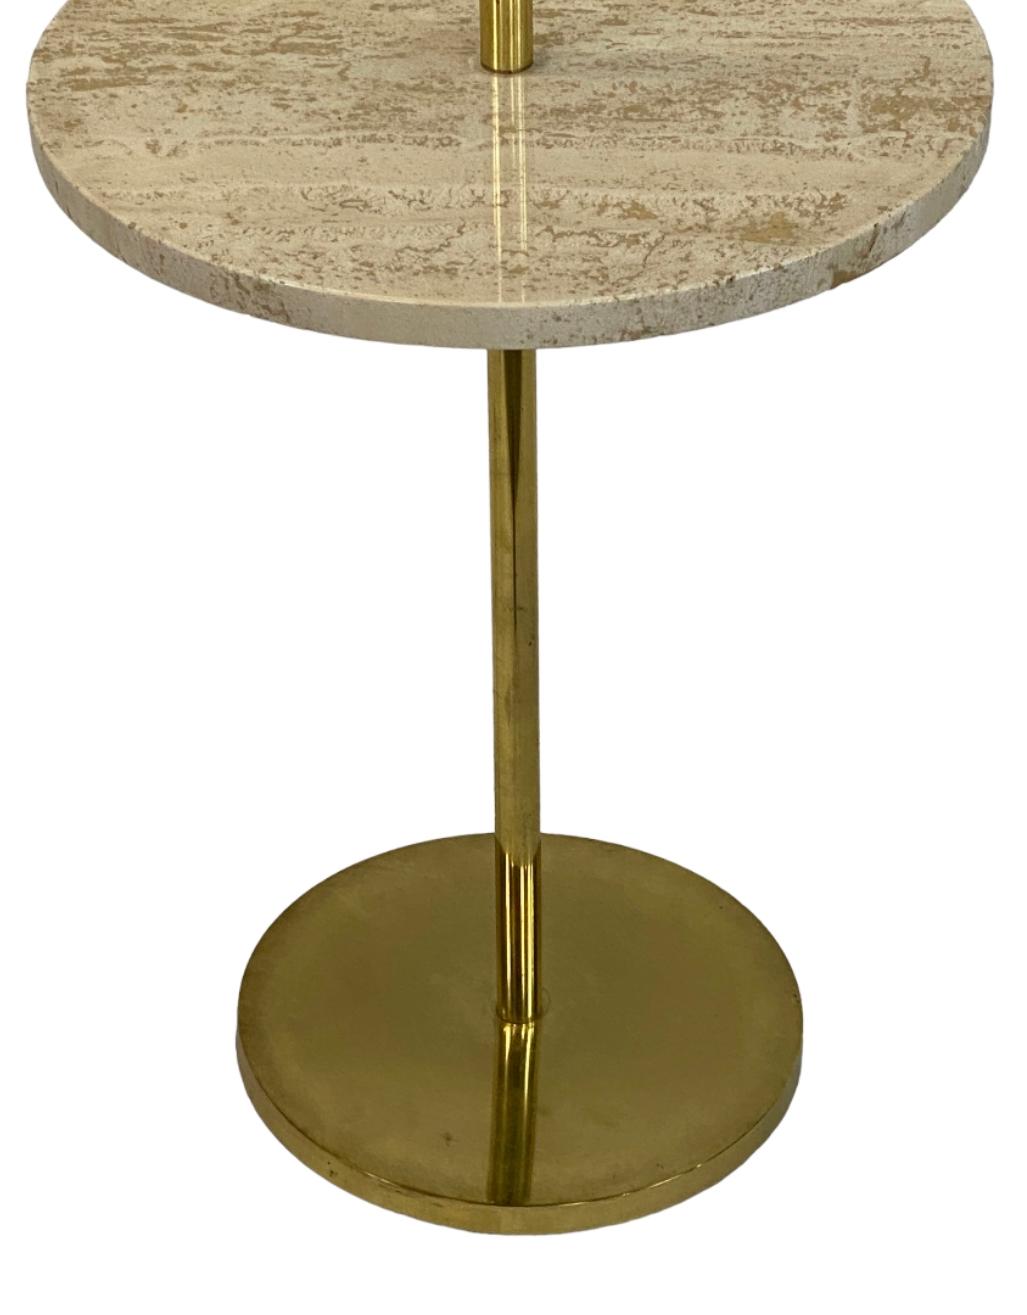 Elegant midcentury modern floor lamp with tray table. Executed in Italian travertine marble and brass. Signed “W&Z” and “Made in Italy” on the underside of the stone. Beautiful veining and color. In good condition with normal age related appearance